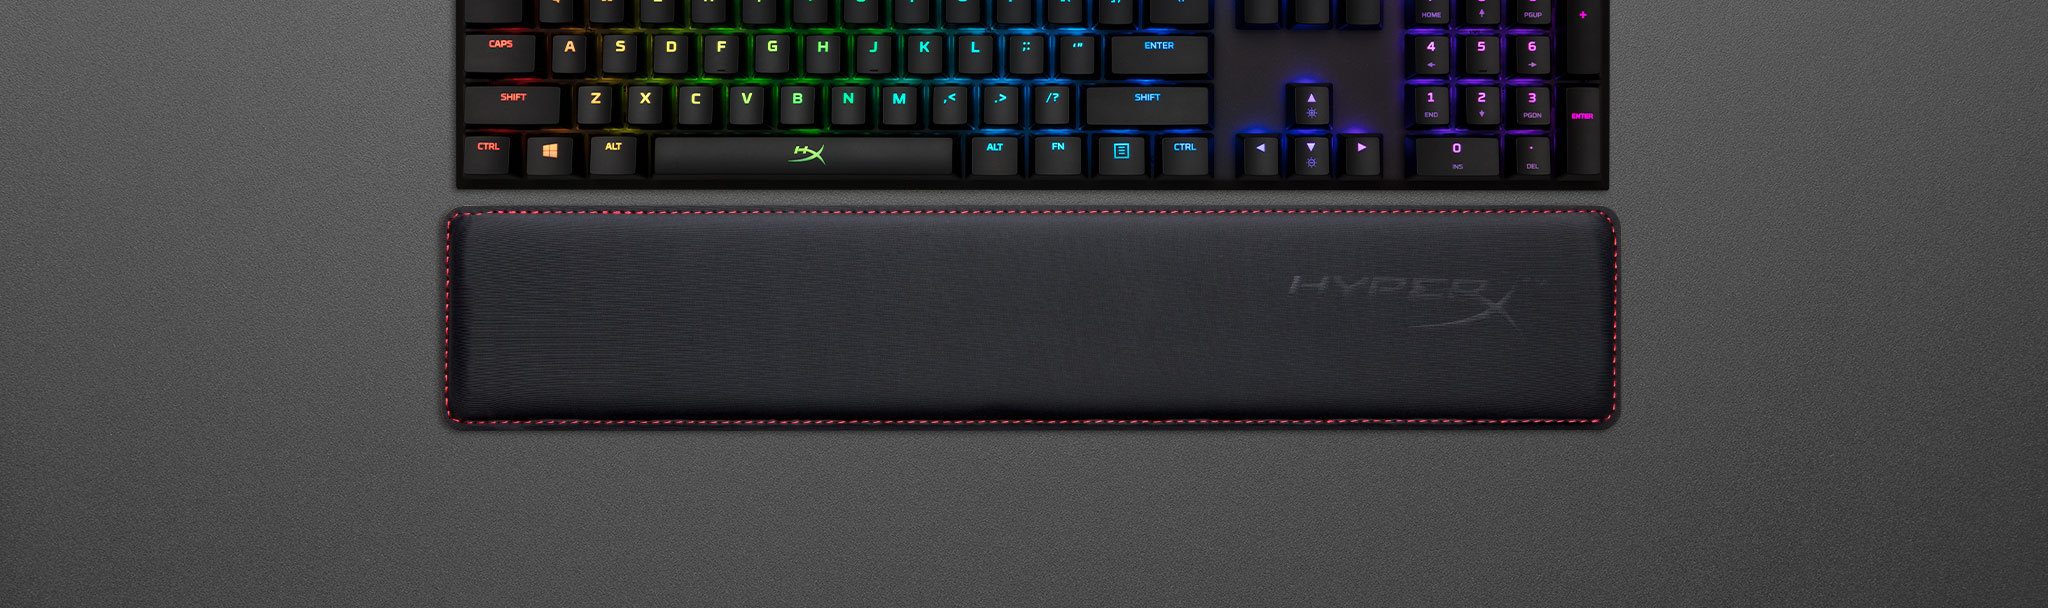 HyperX Wrist Rest – Should You Invest in This Wrist Rest?